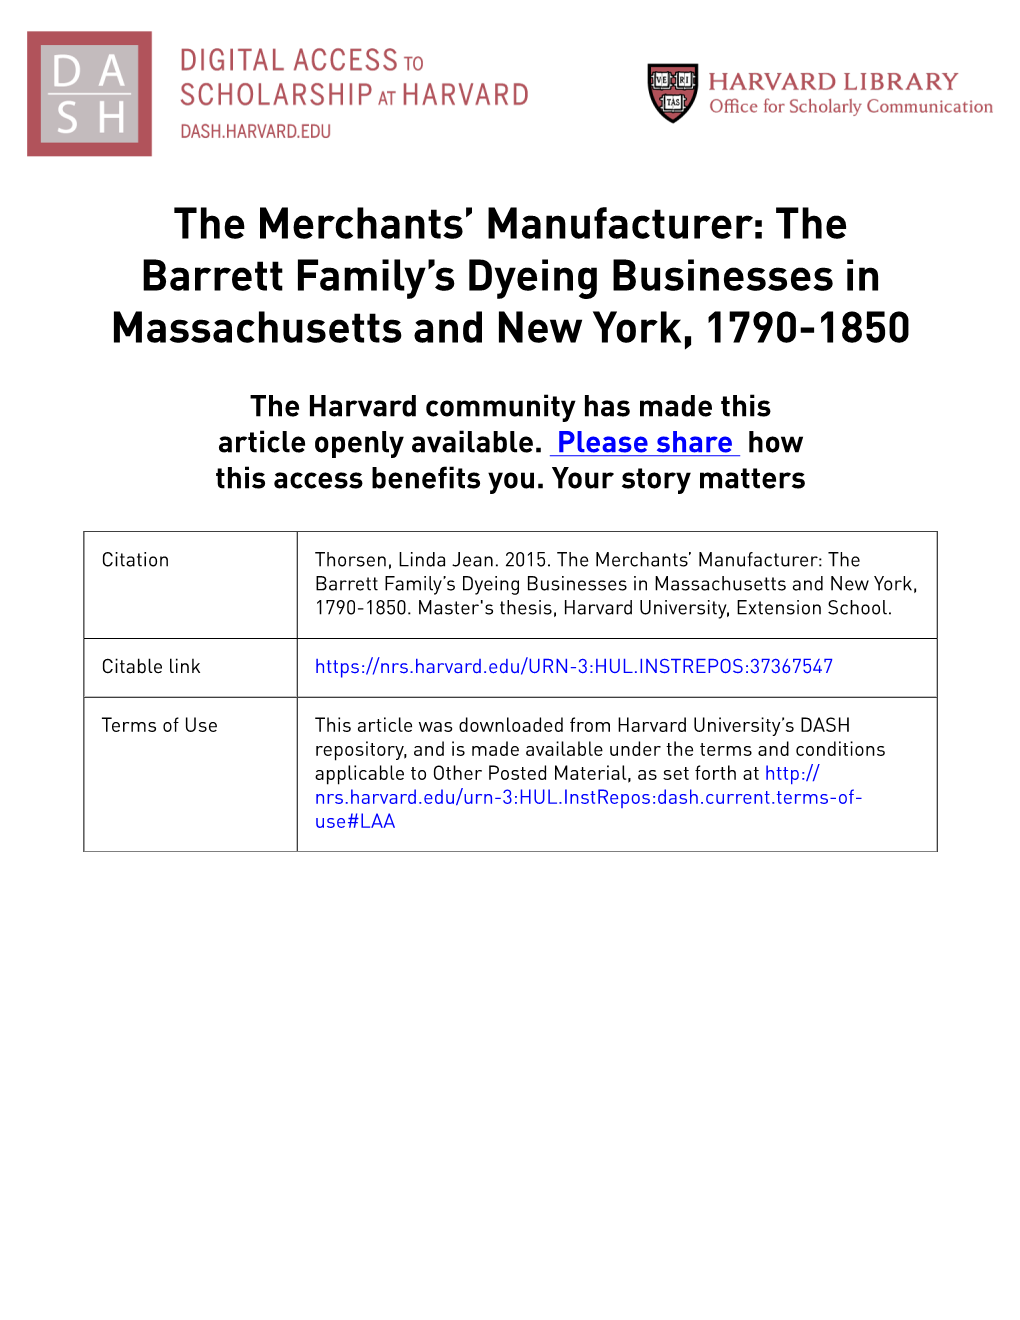 The Merchants' Manufacturer: the Barrett Family's Dyeing Businesses